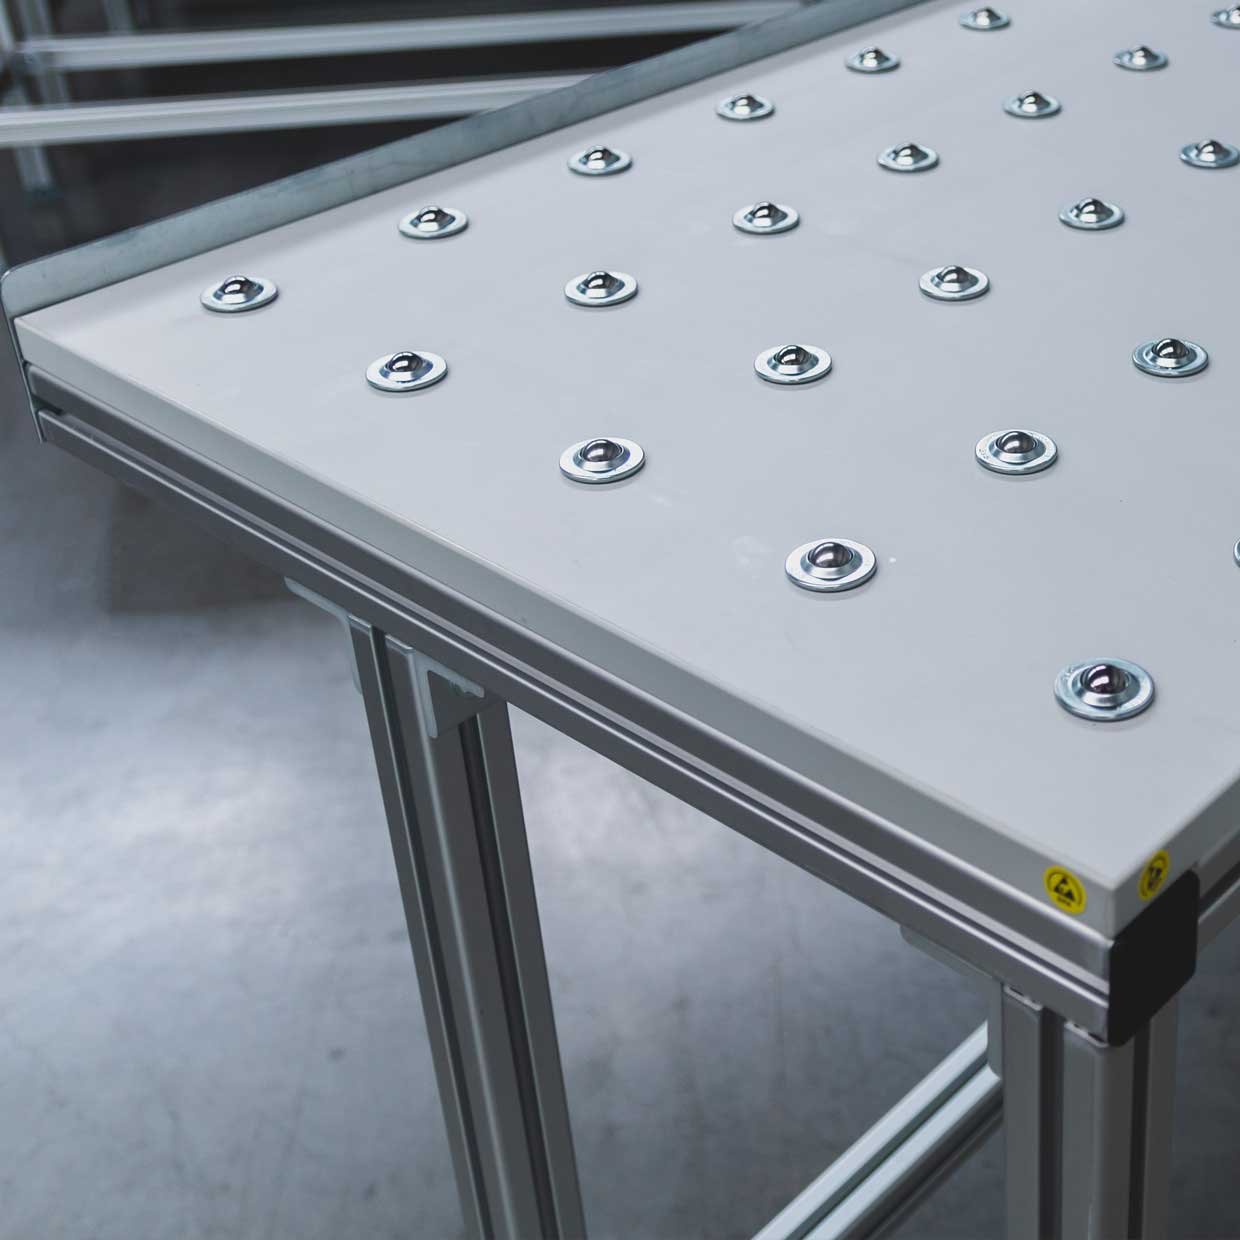 A table top with embedded low-wear and low-friction ball casters on a base frame made of aluminum square profiles.